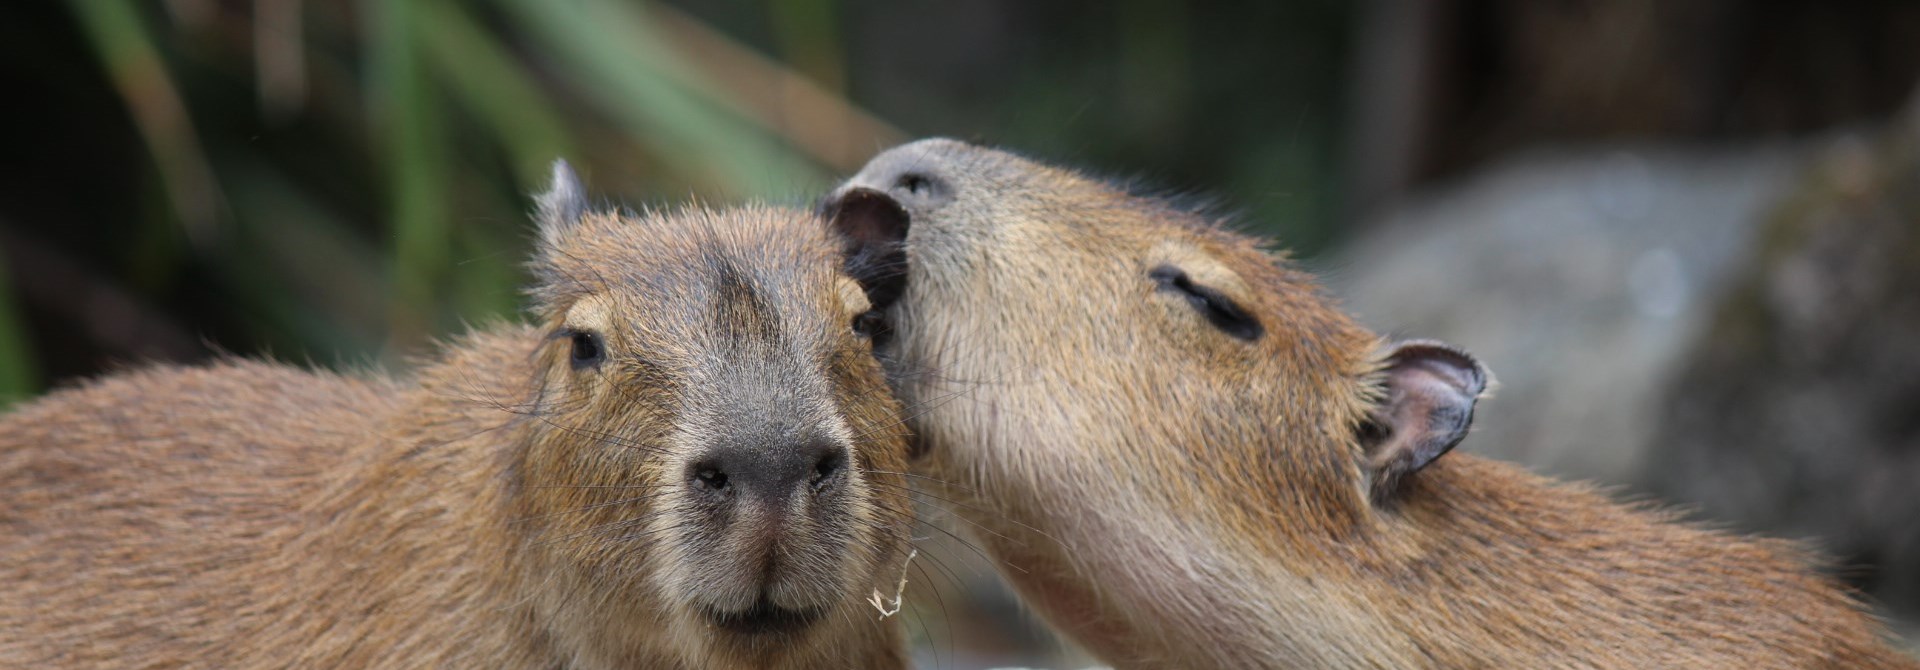 Two Capybaras nuzzling each other.